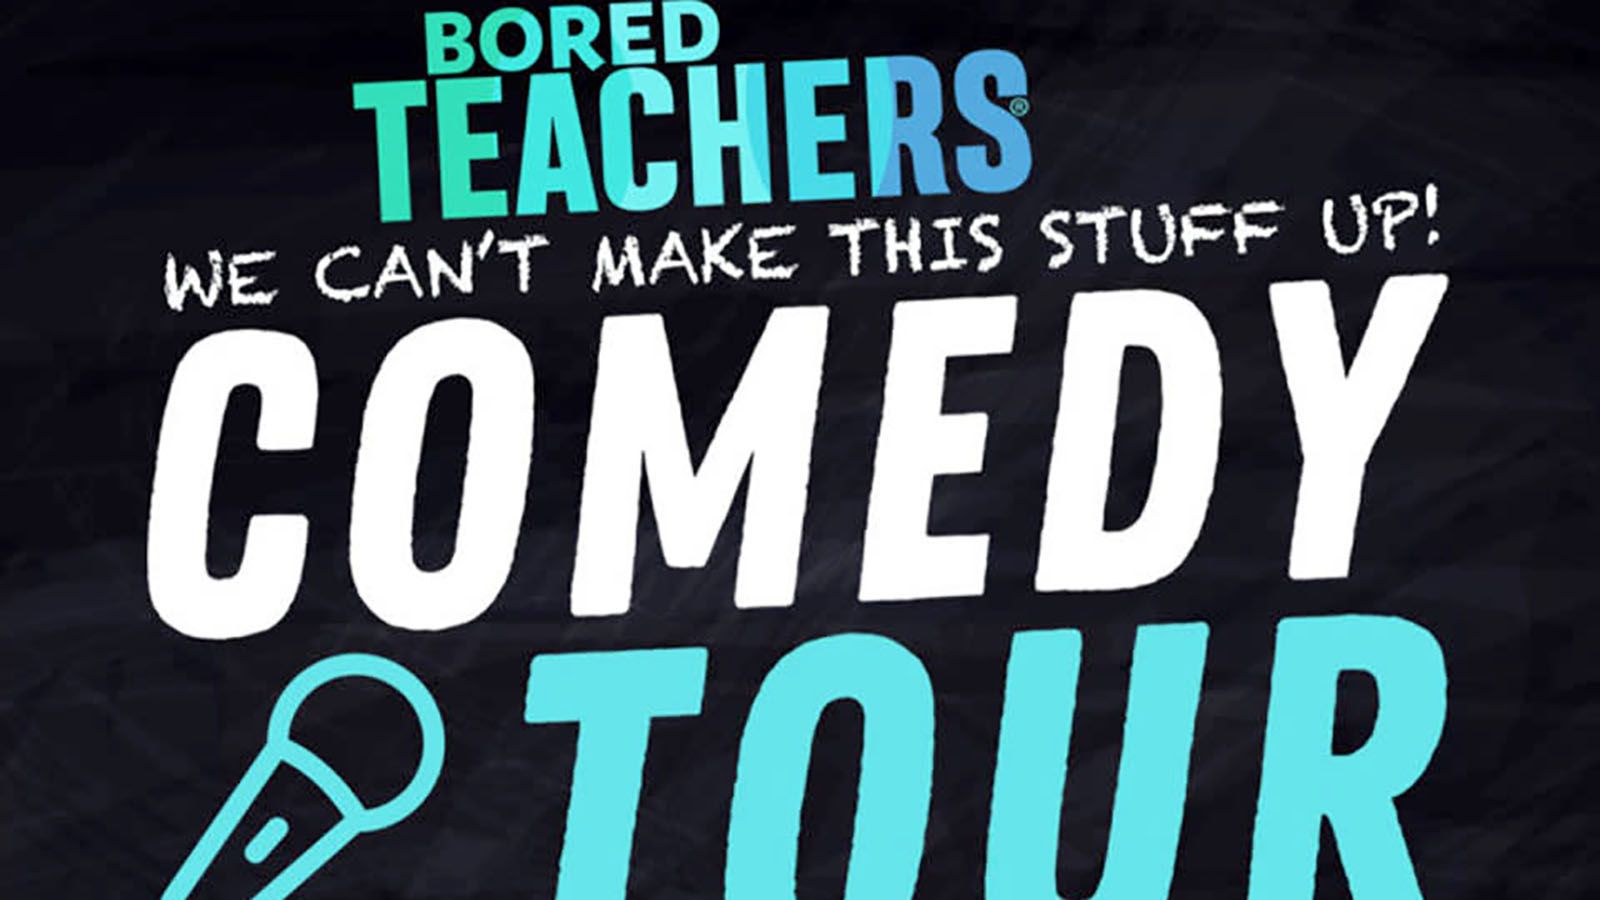 The Bored Teachers Comedy Tour stops at Honeywell Center in Wabash on Nov. 17.